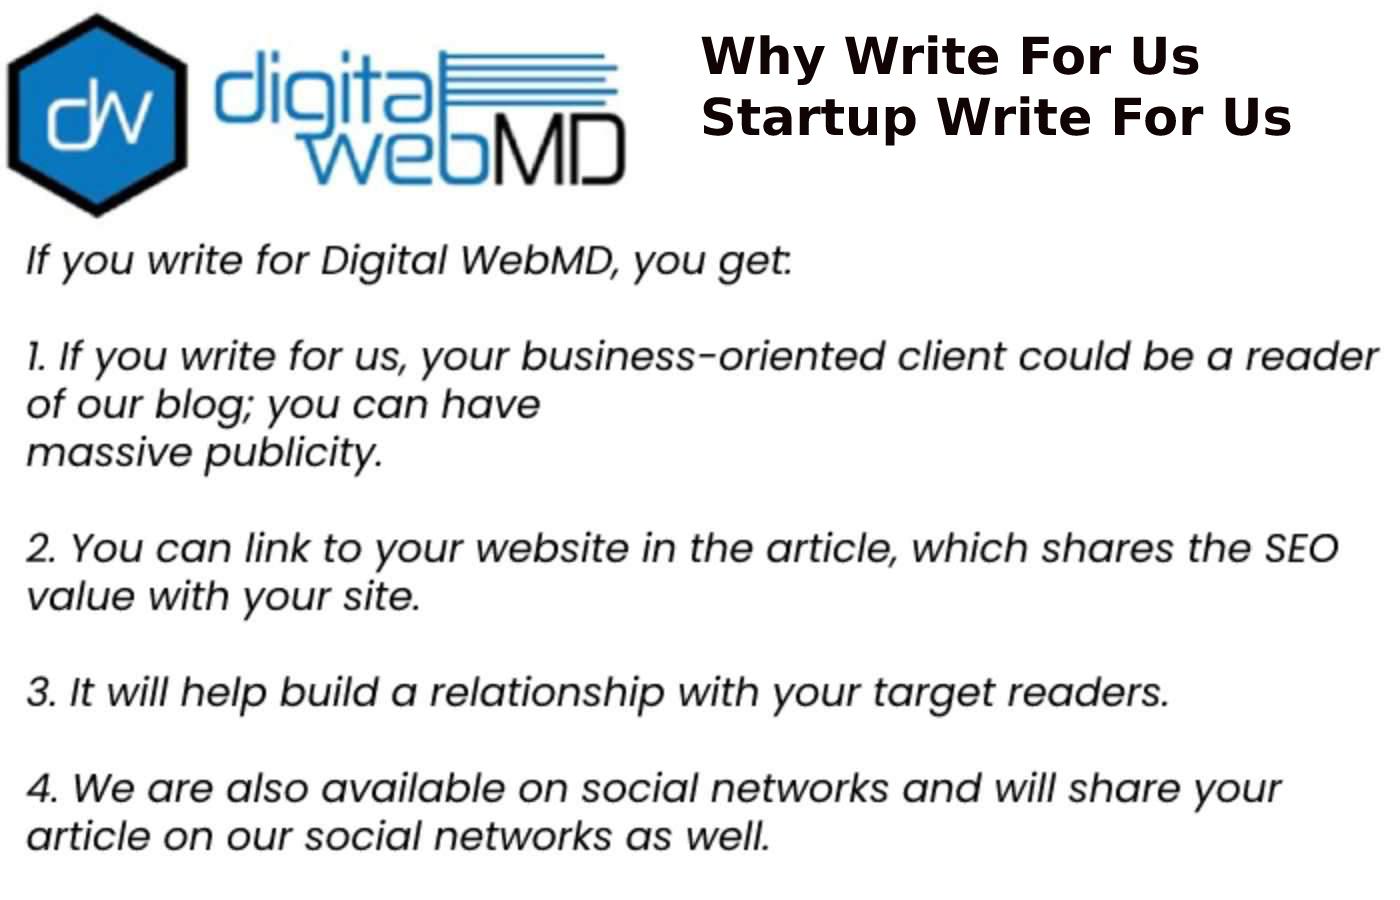 Why Write For Us Startup Write For Us